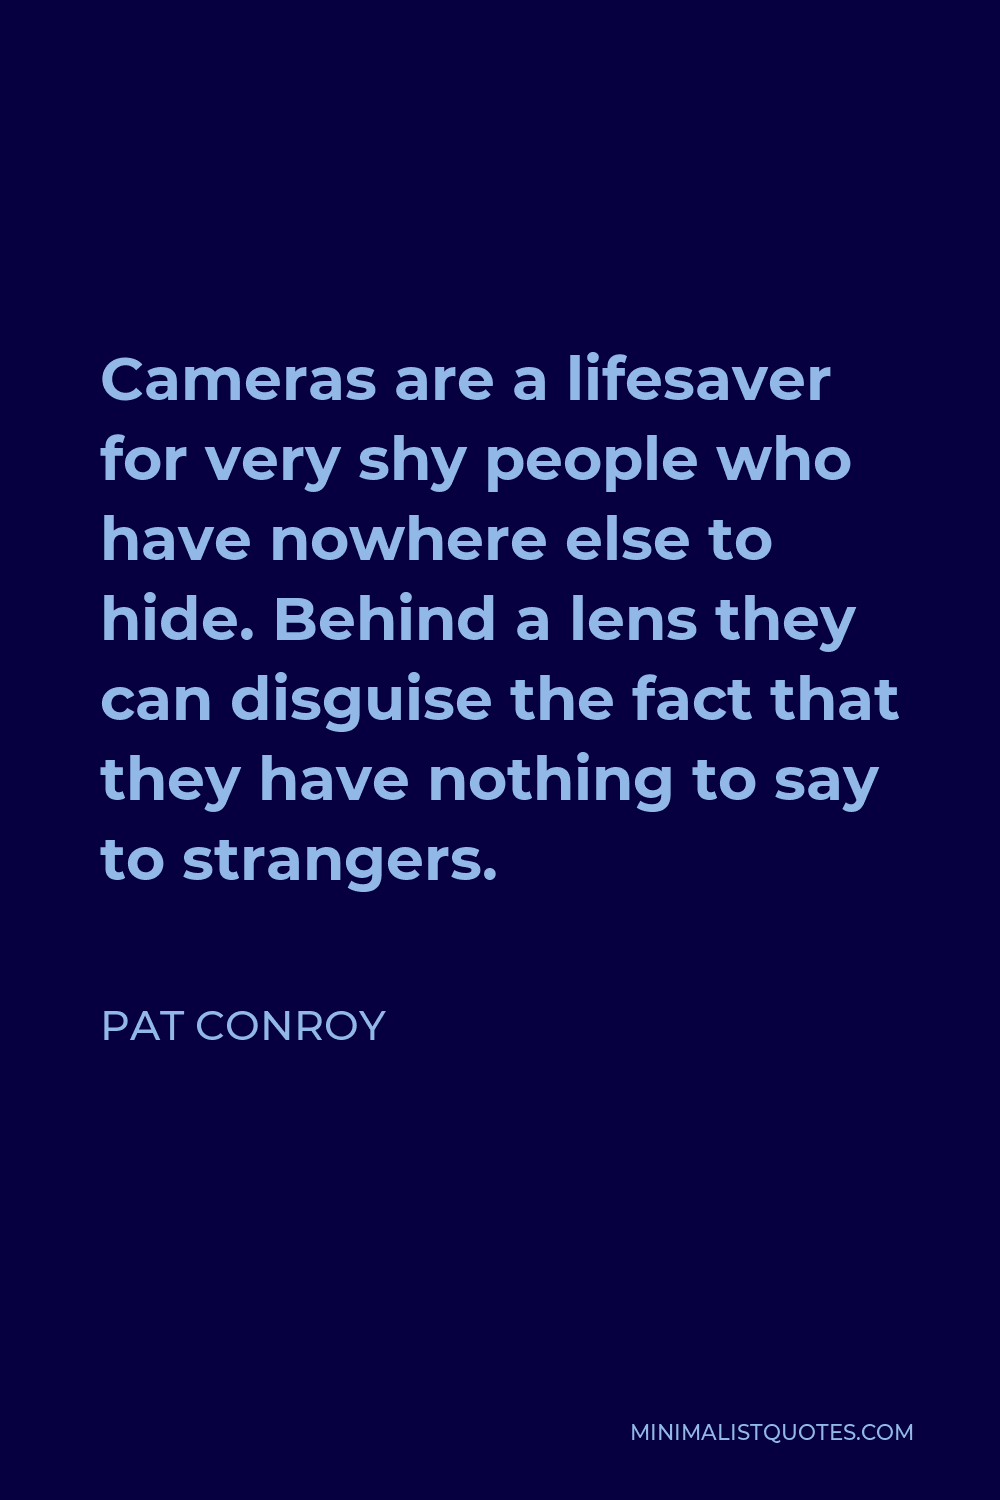 Pat Conroy Quote - Cameras are a lifesaver for very shy people who have nowhere else to hide. Behind a lens they can disguise the fact that they have nothing to say to strangers.